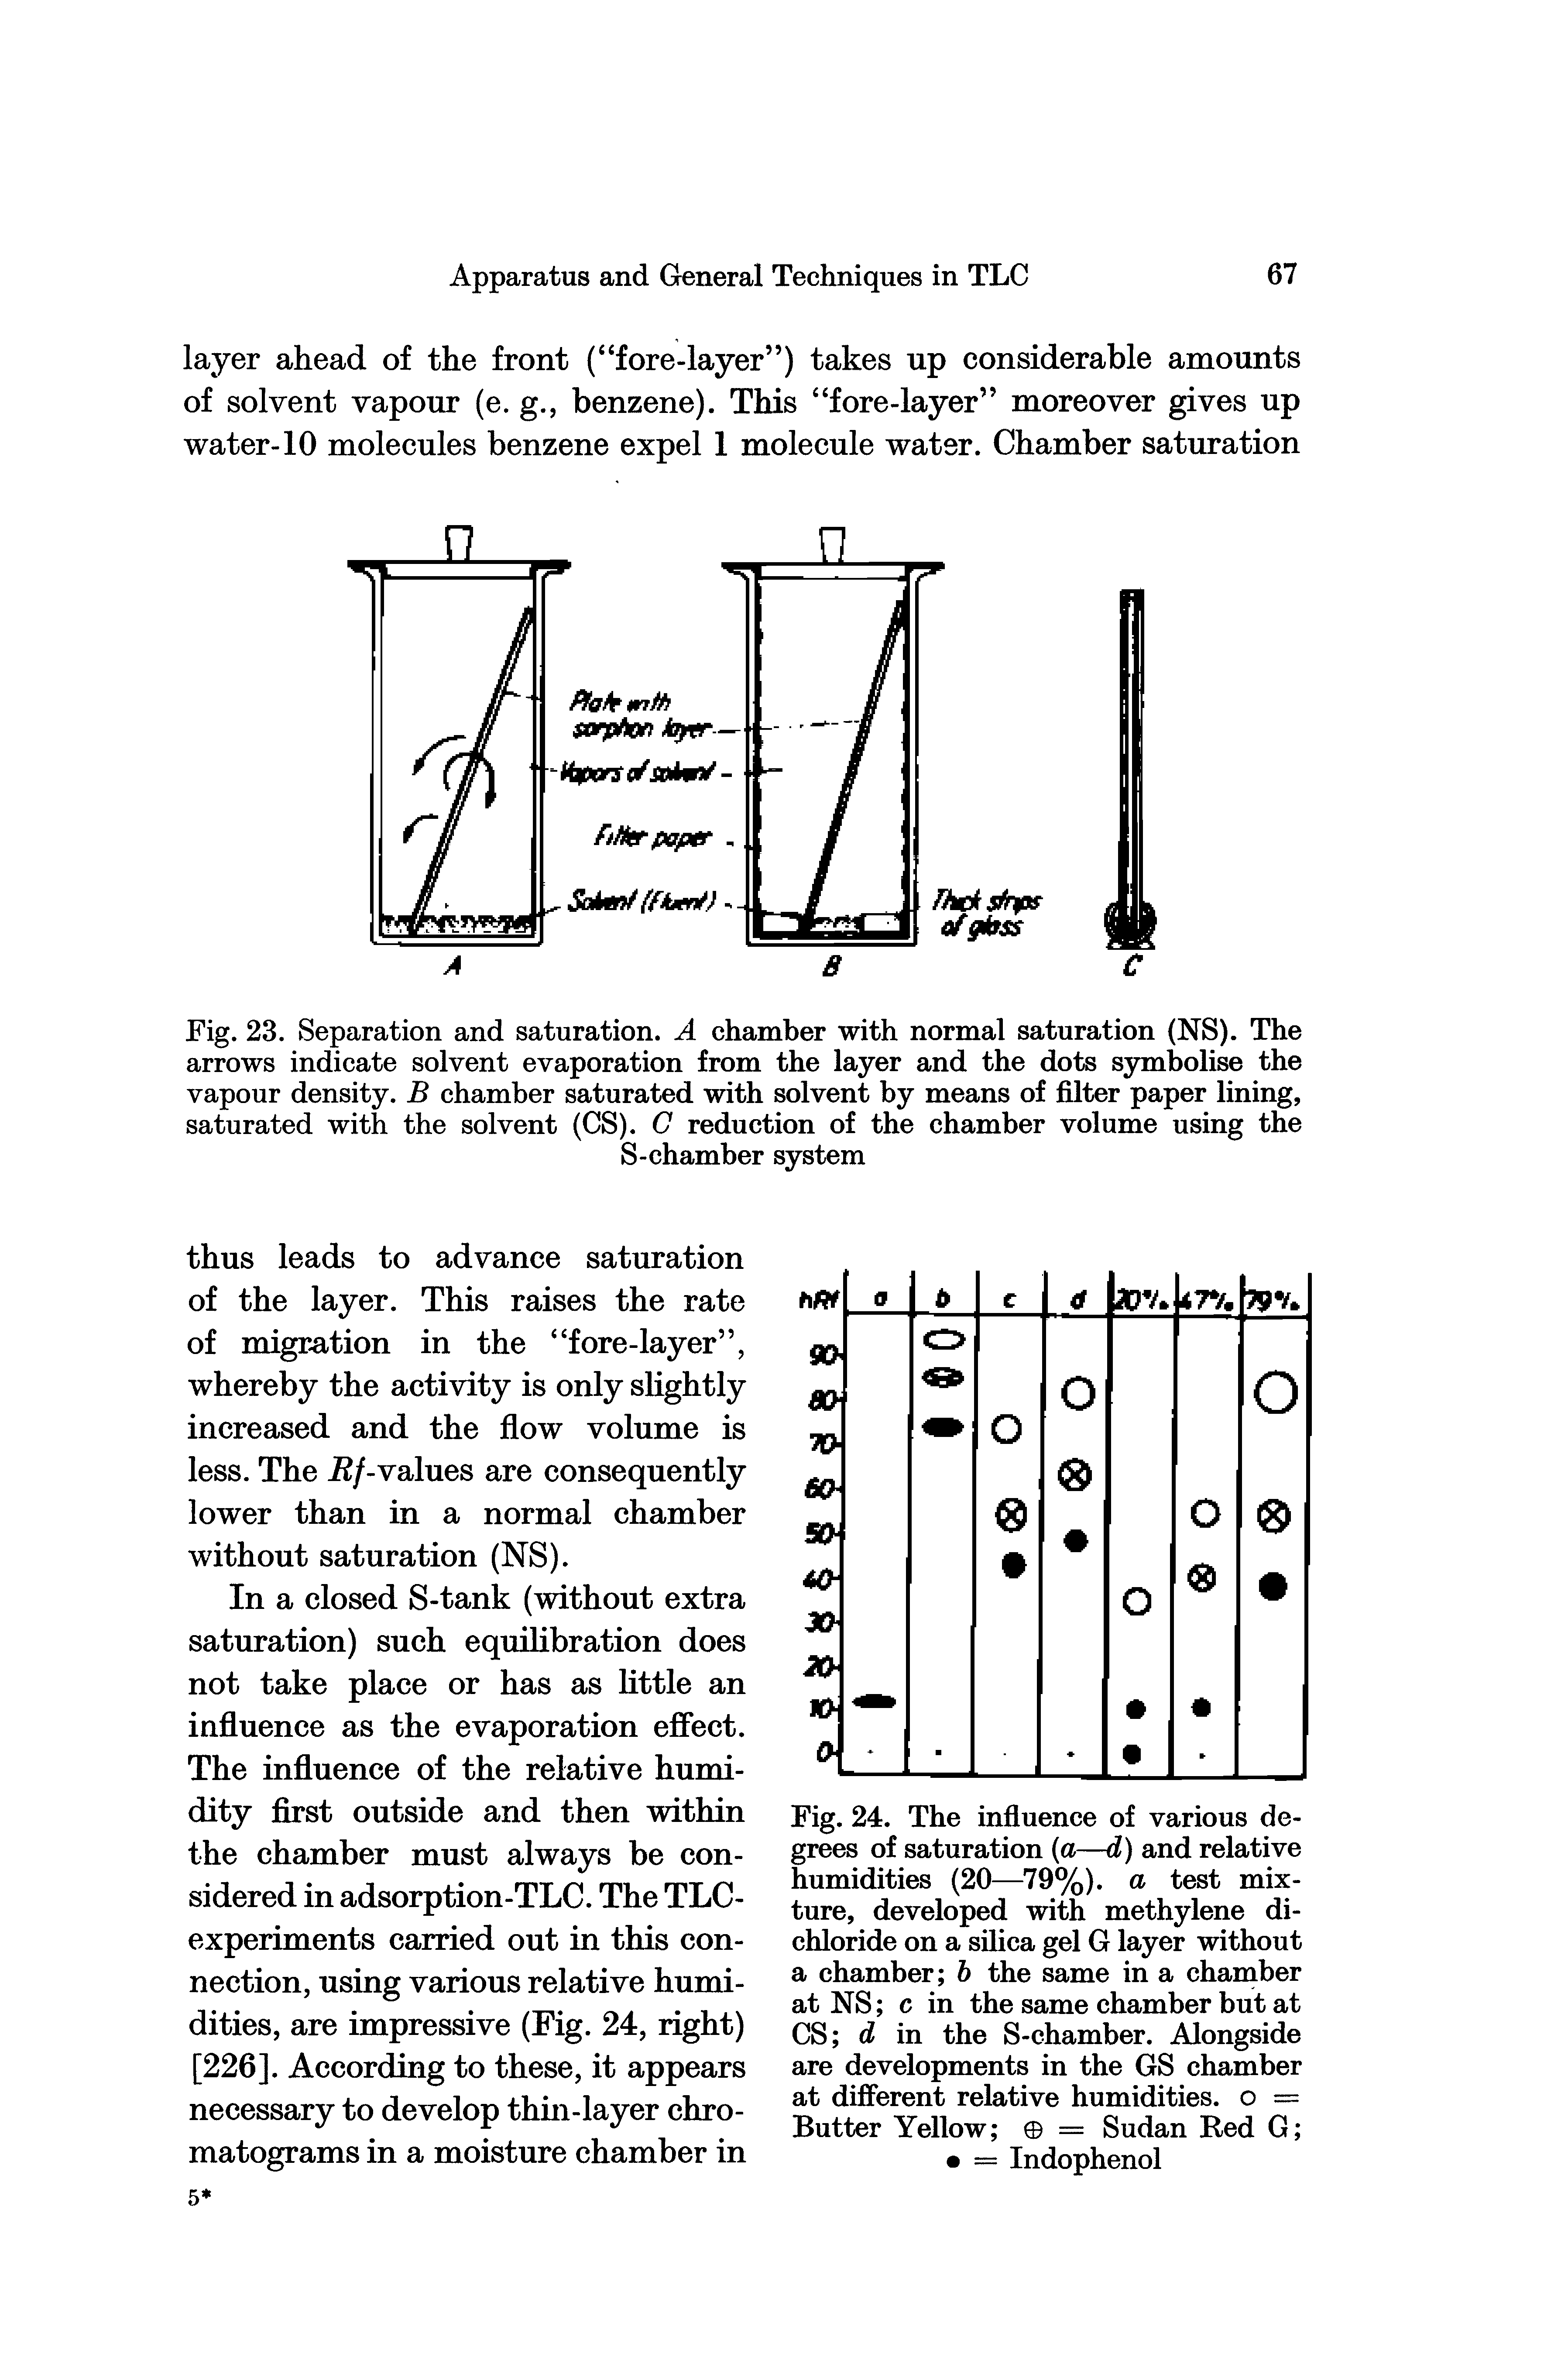 Fig. 24. The influence of various degrees of saturation (a—d) and relative humidities (20— 79%). a test mixture, developed with methylene dichloride on a silica gel G layer without a chamber b the same in a charuber at NS c in the same chamber but at CS d in the S-chamber. Alongside are developments in the GS chamber at different relative humidities, o = Butter Yellow = Sudan Red G ...